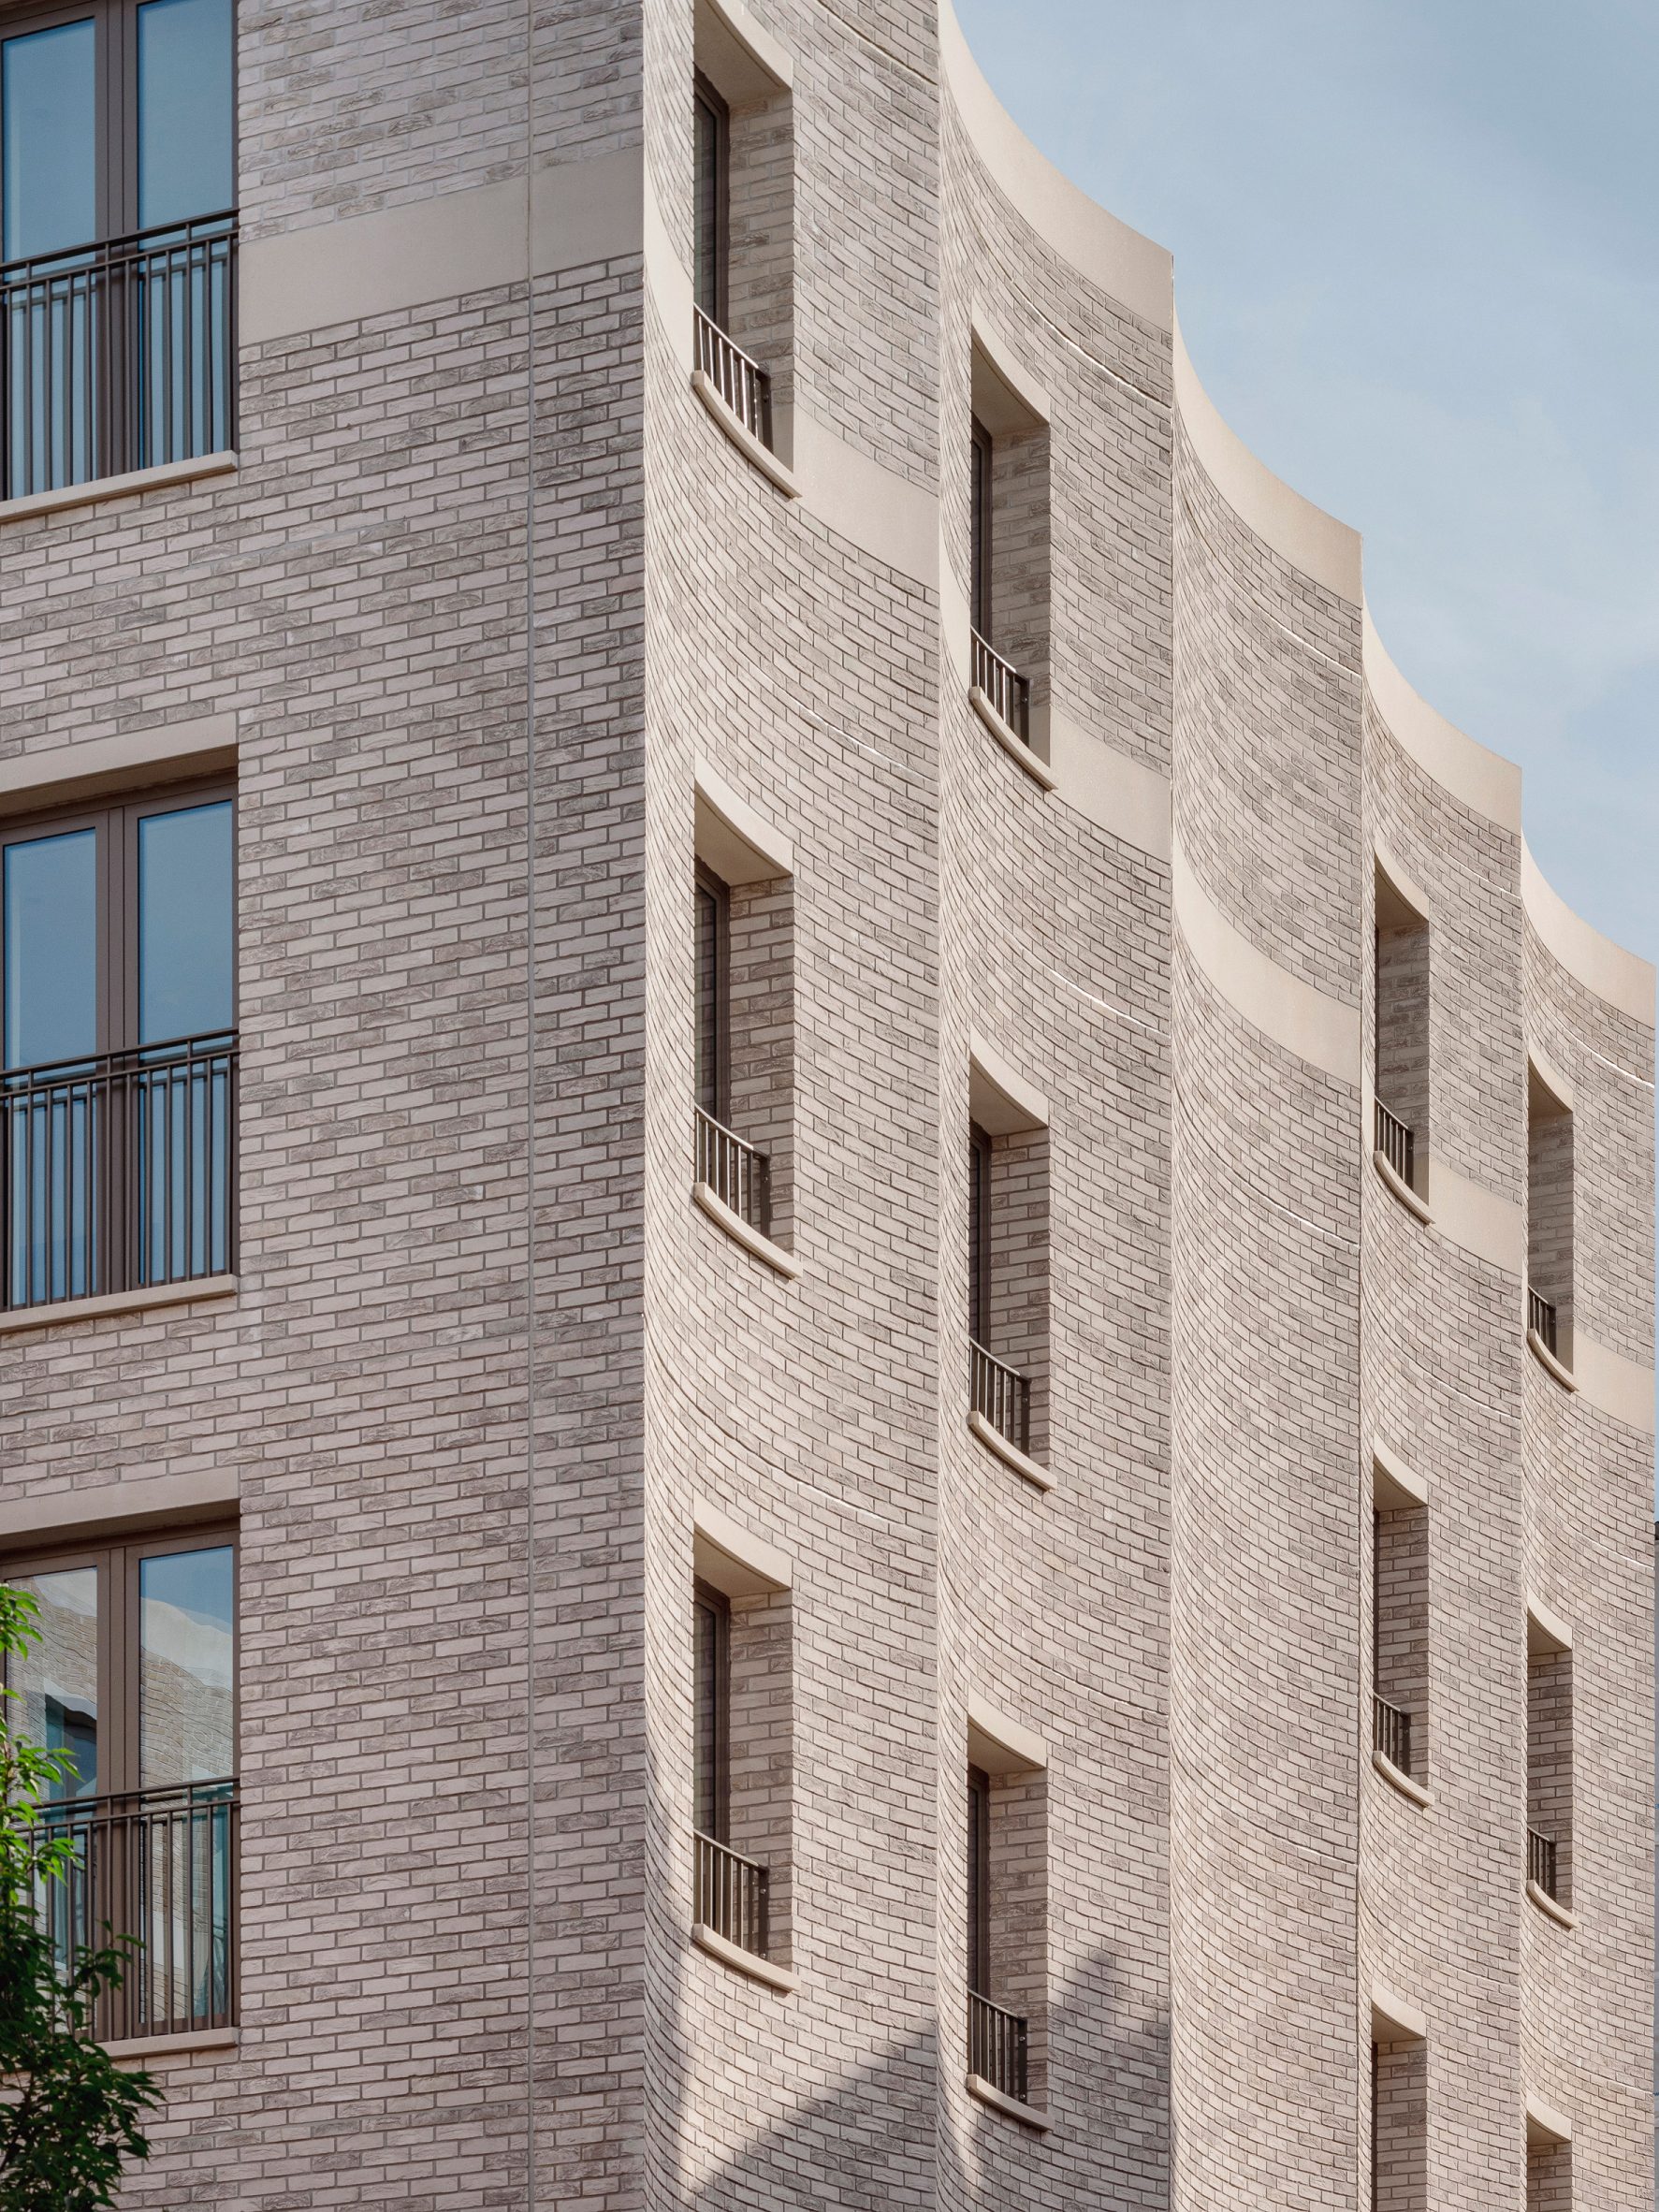 Fluted brick facade on London housing by Bell Phillips